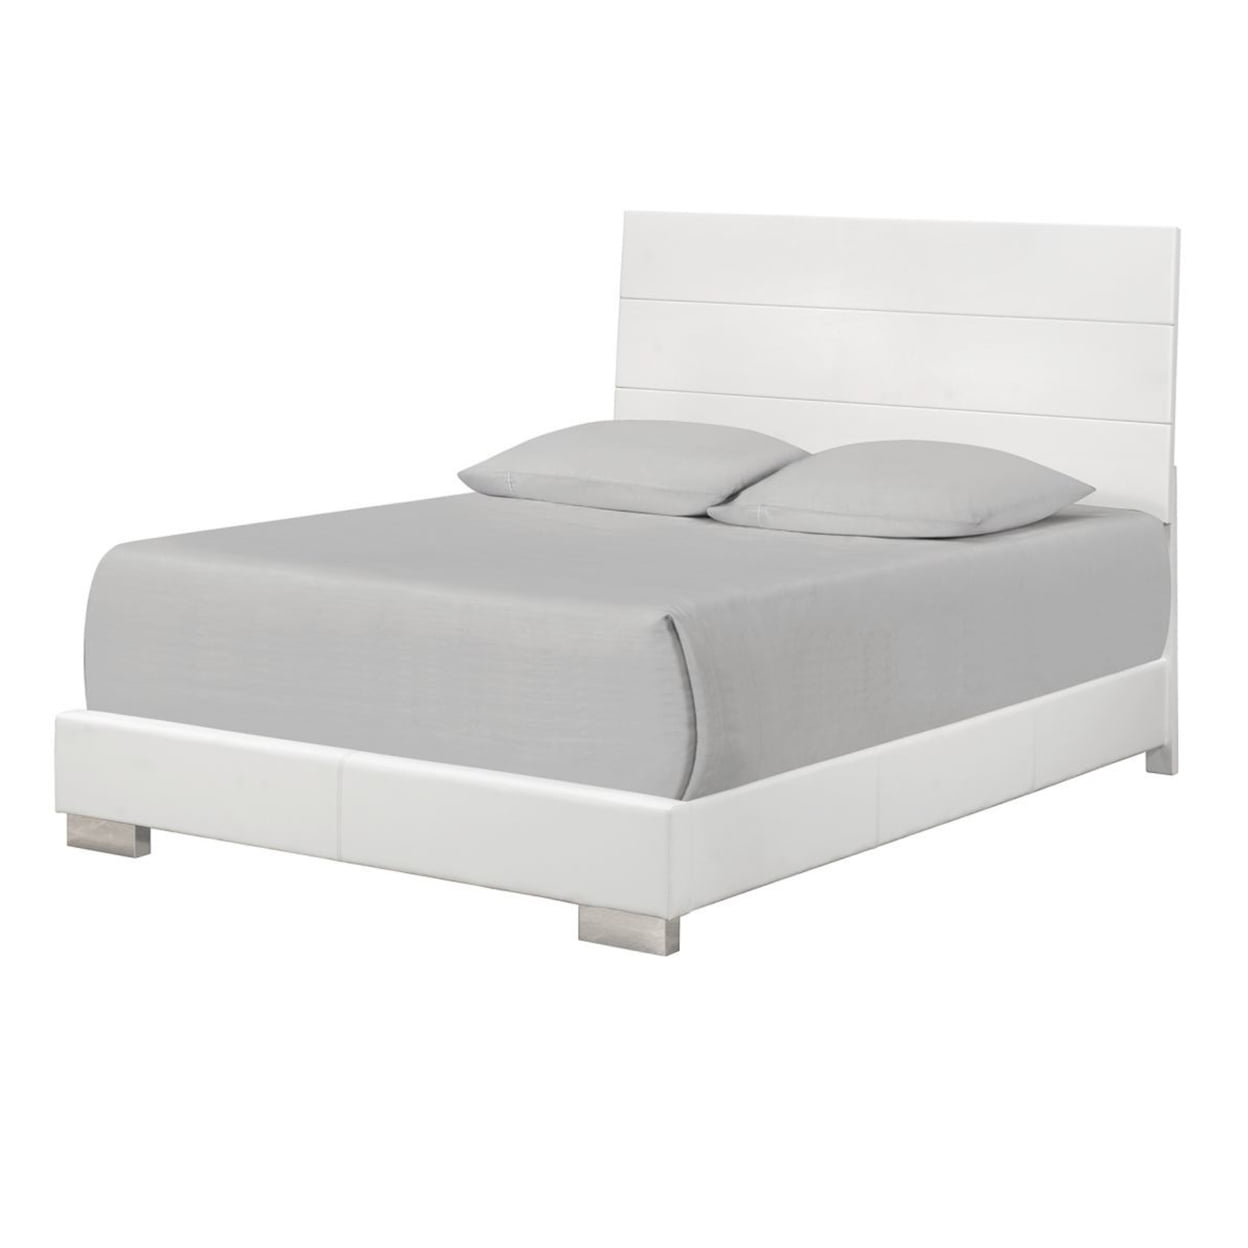 BM208155 Wooden Queen Size Bed with Plank Style Headboard, White -  Benzara